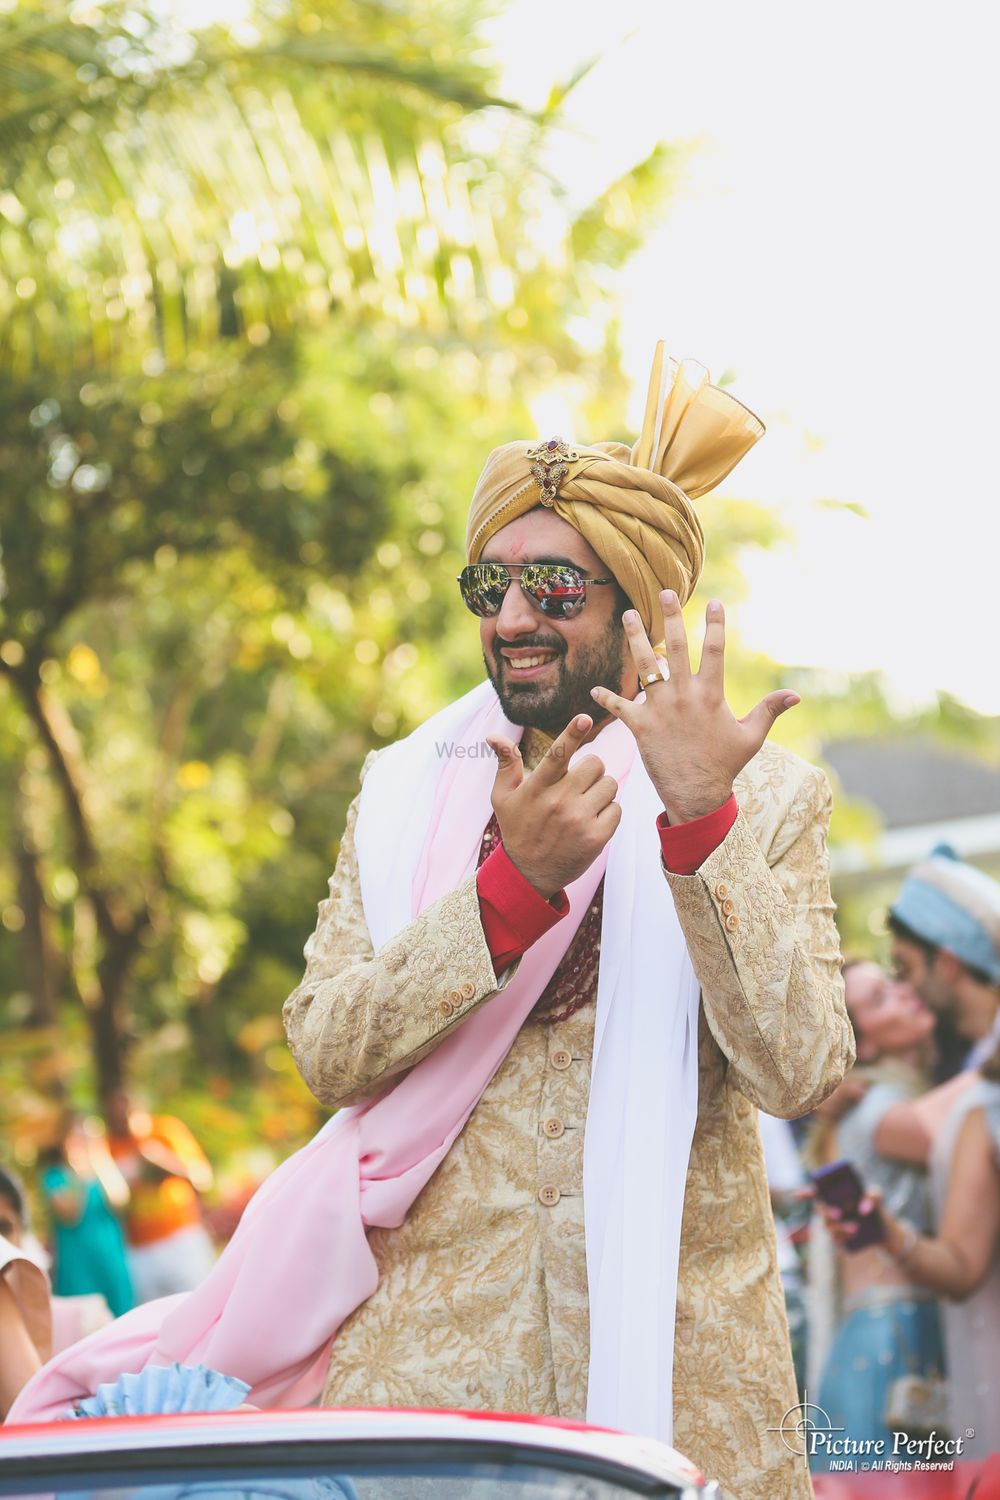 Photo From Varun + Jyotsna's wedding in Bali - By Picture Perfect India